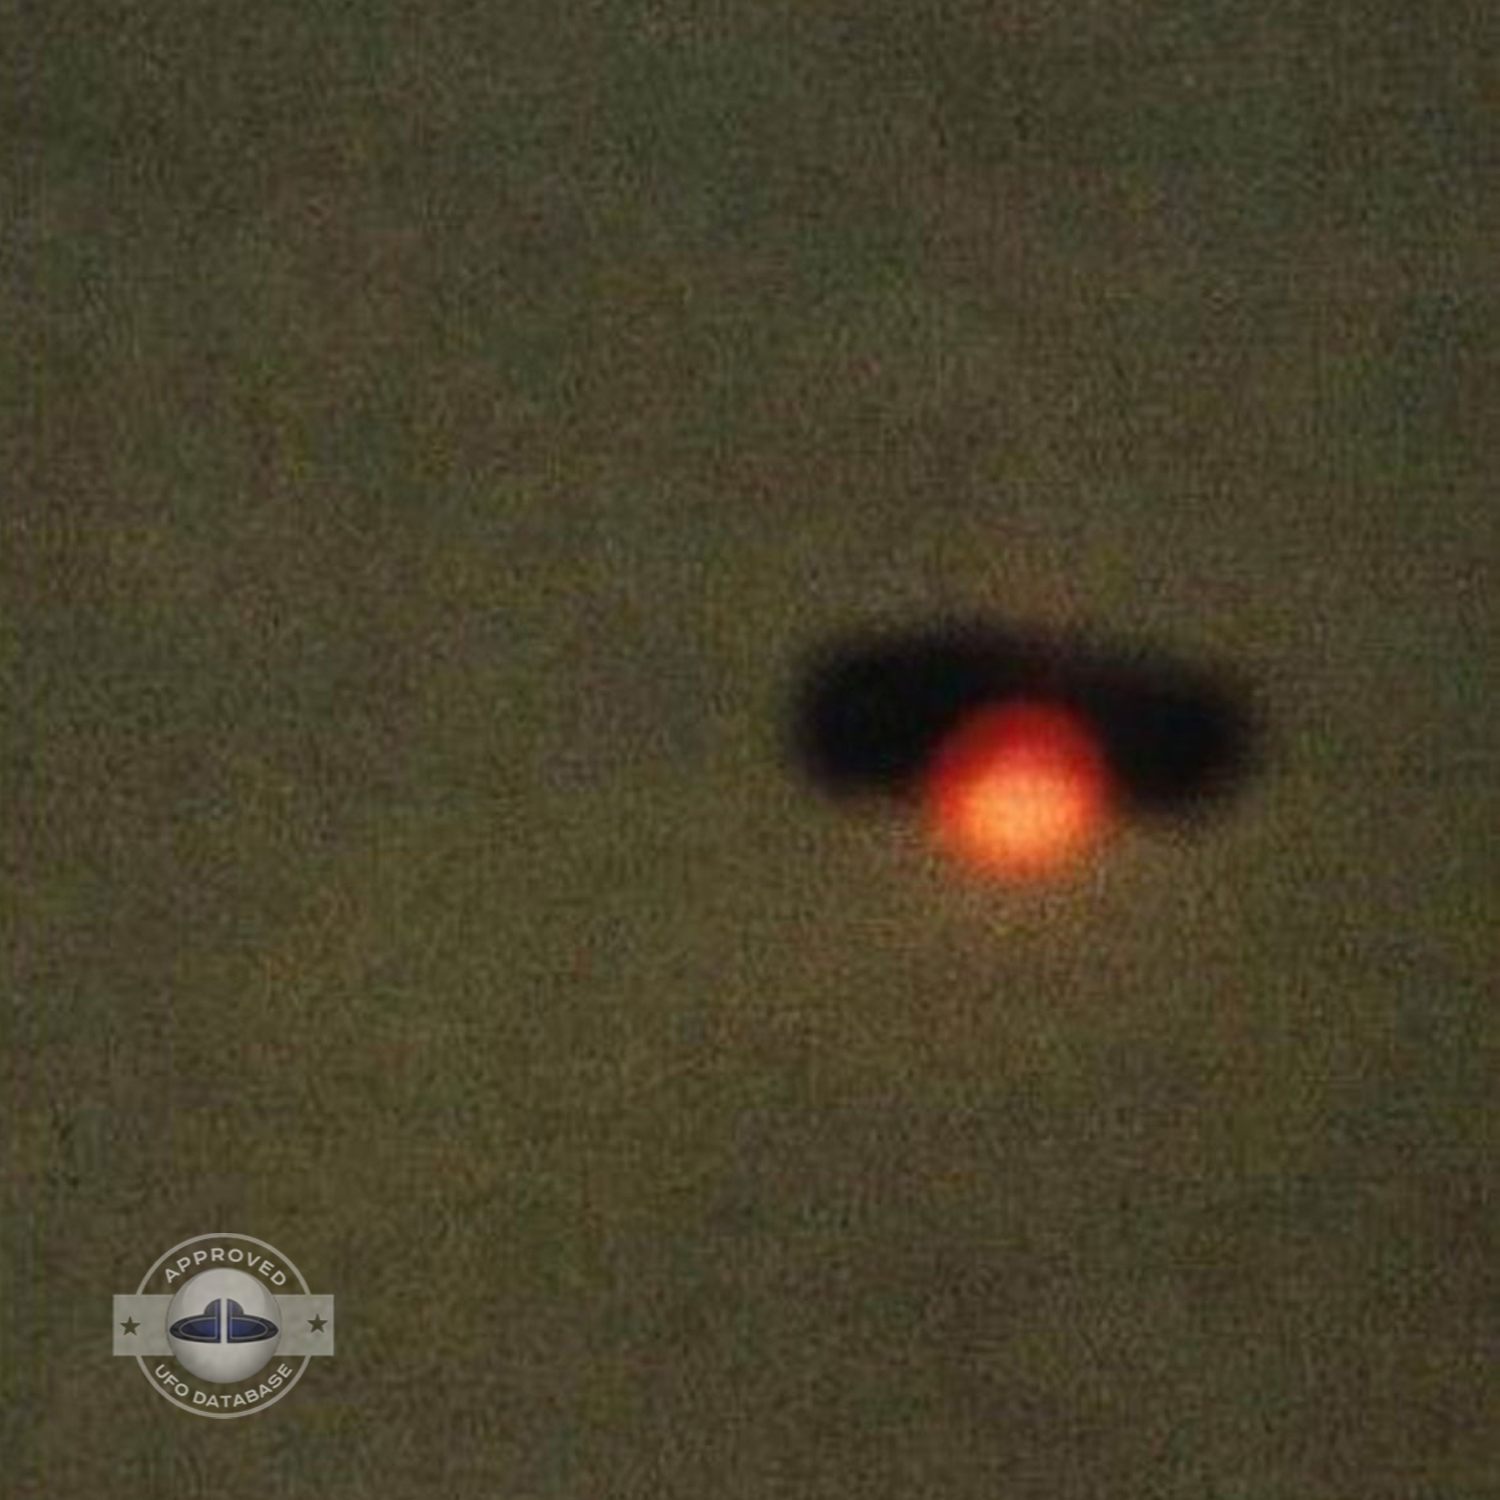 1993 UFO picture - part of The Gulf Breeze UFO incident - Florida USA UFO Picture #133-2